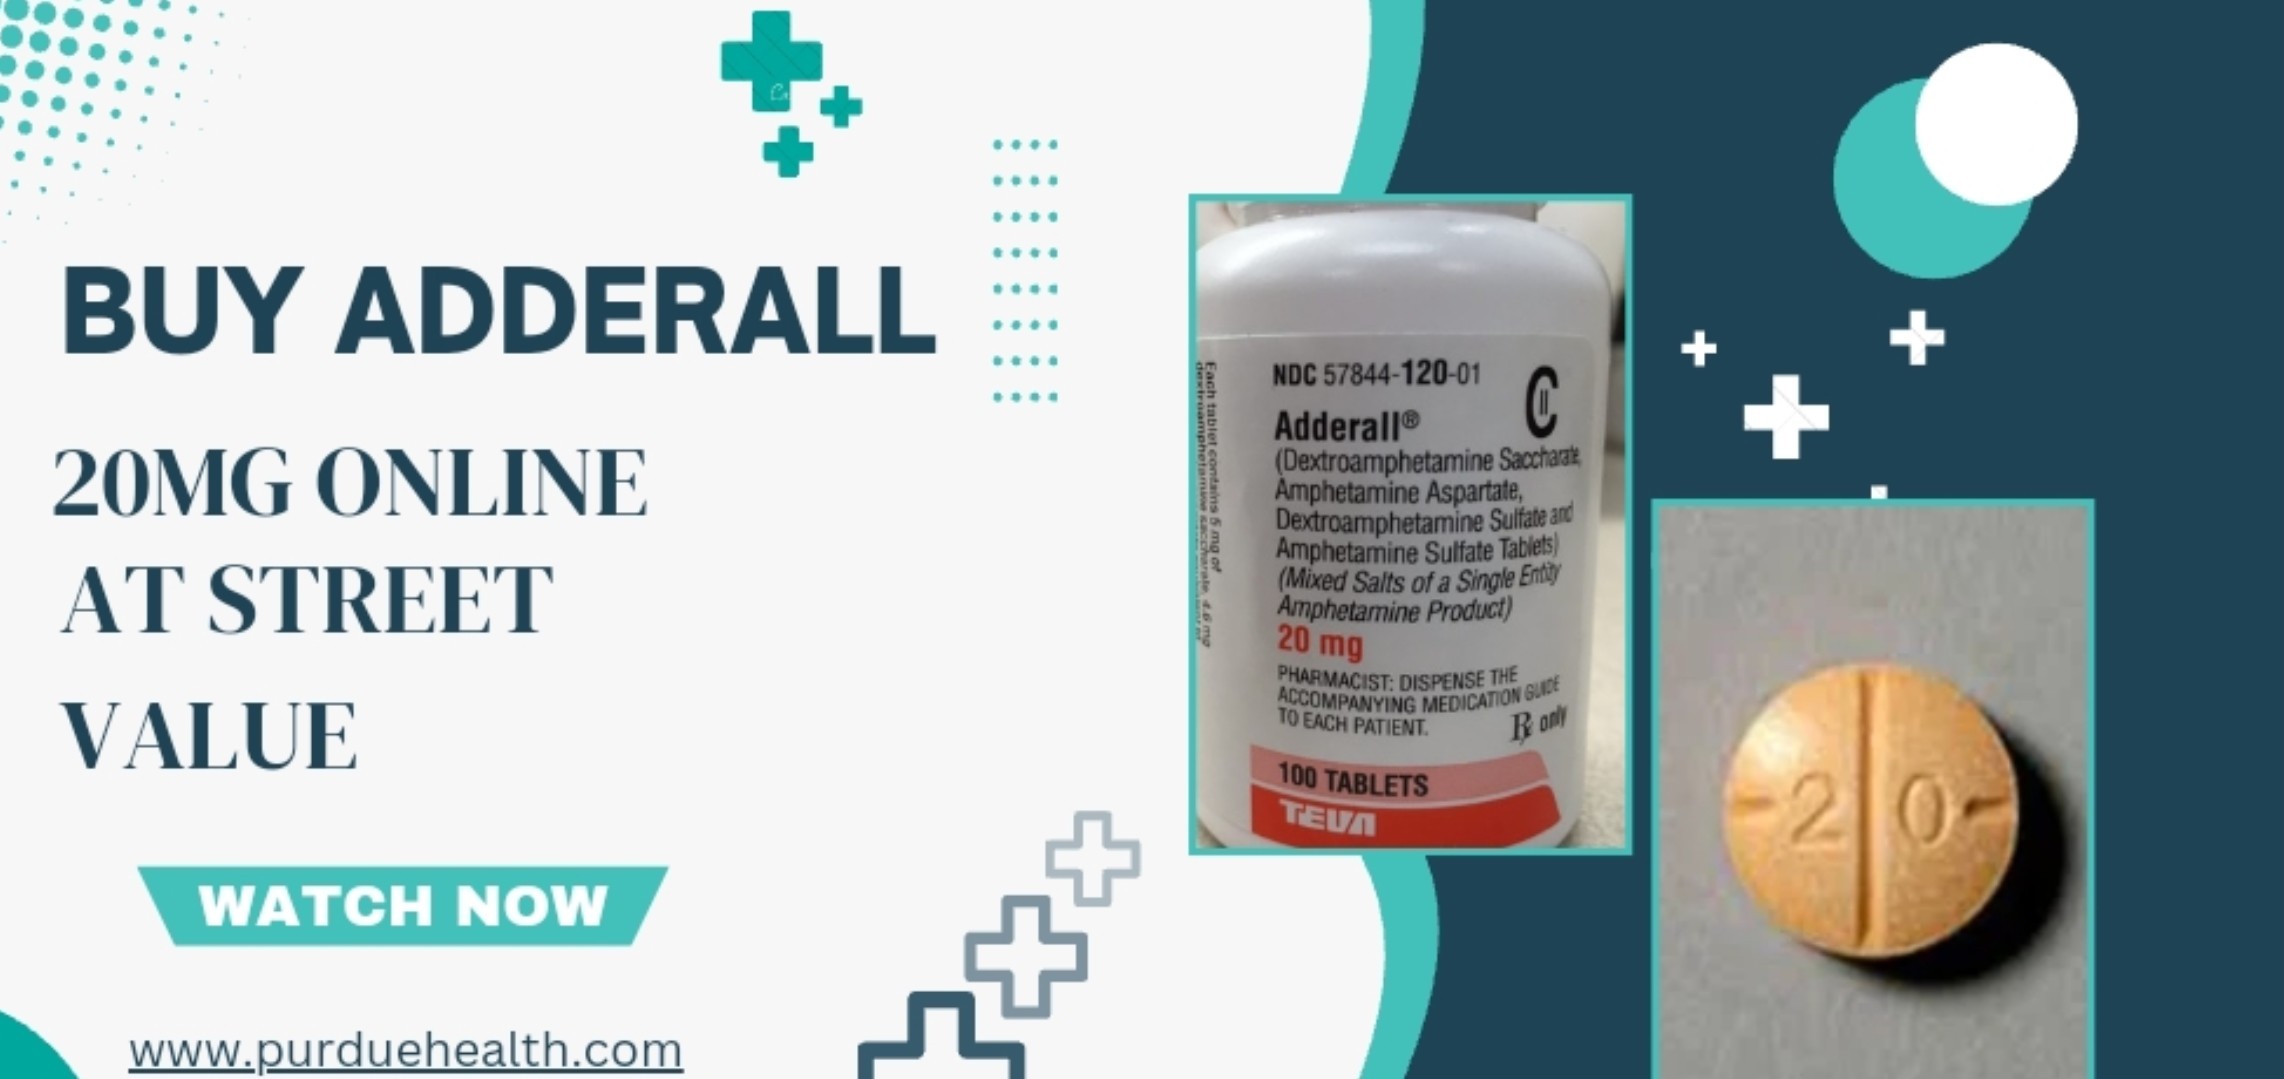 Buy Adderall 20mg Online at Street Value | PurdueHealth